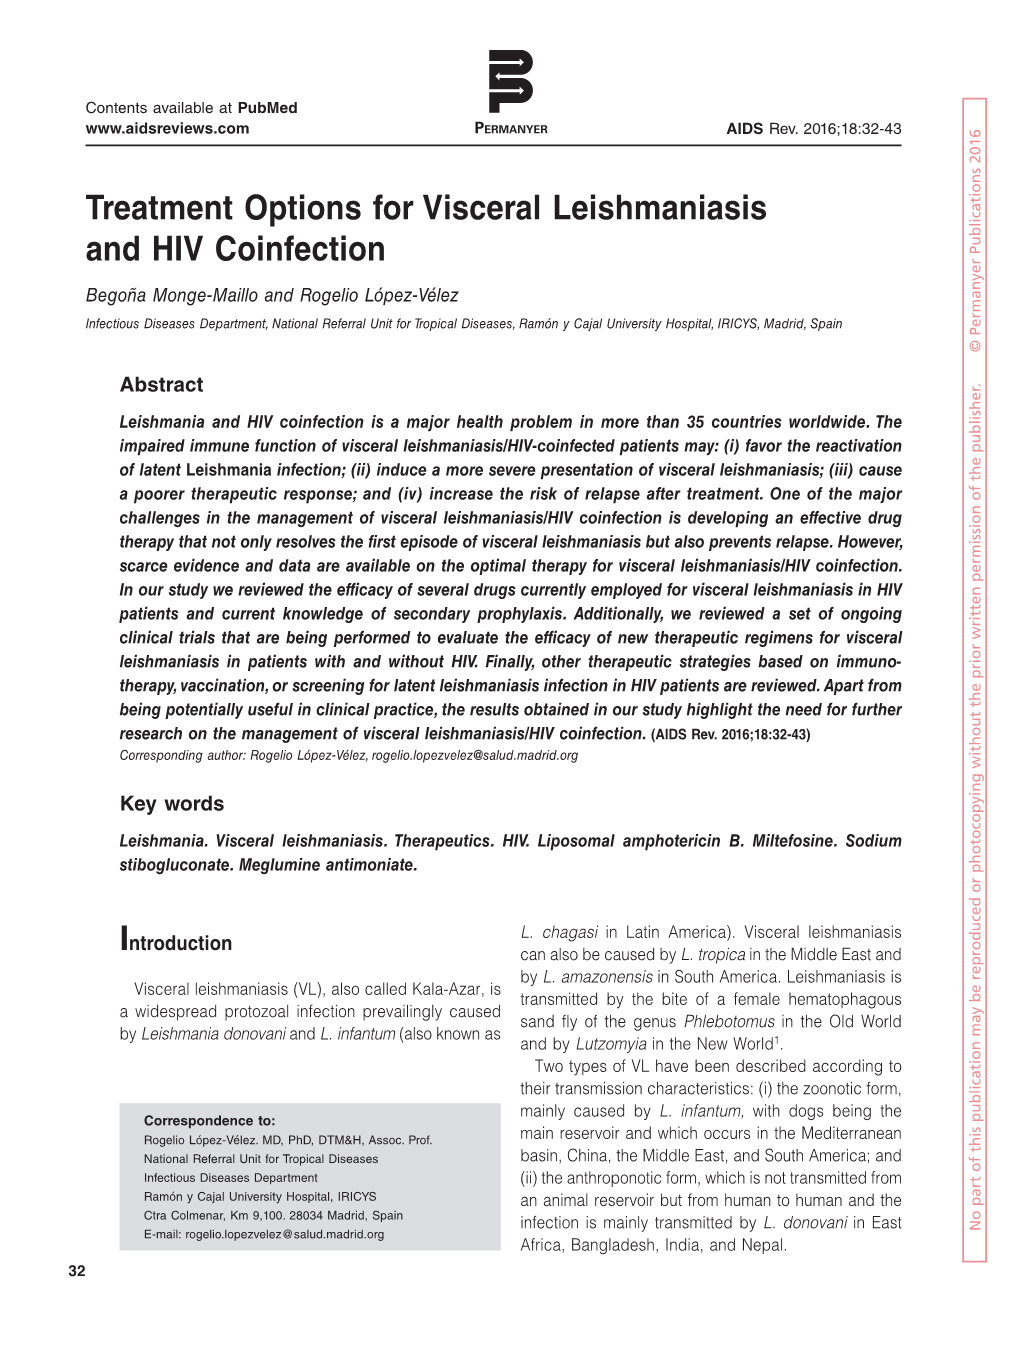 Treatment Options for Visceral Leishmaniasis and HIV Coinfection